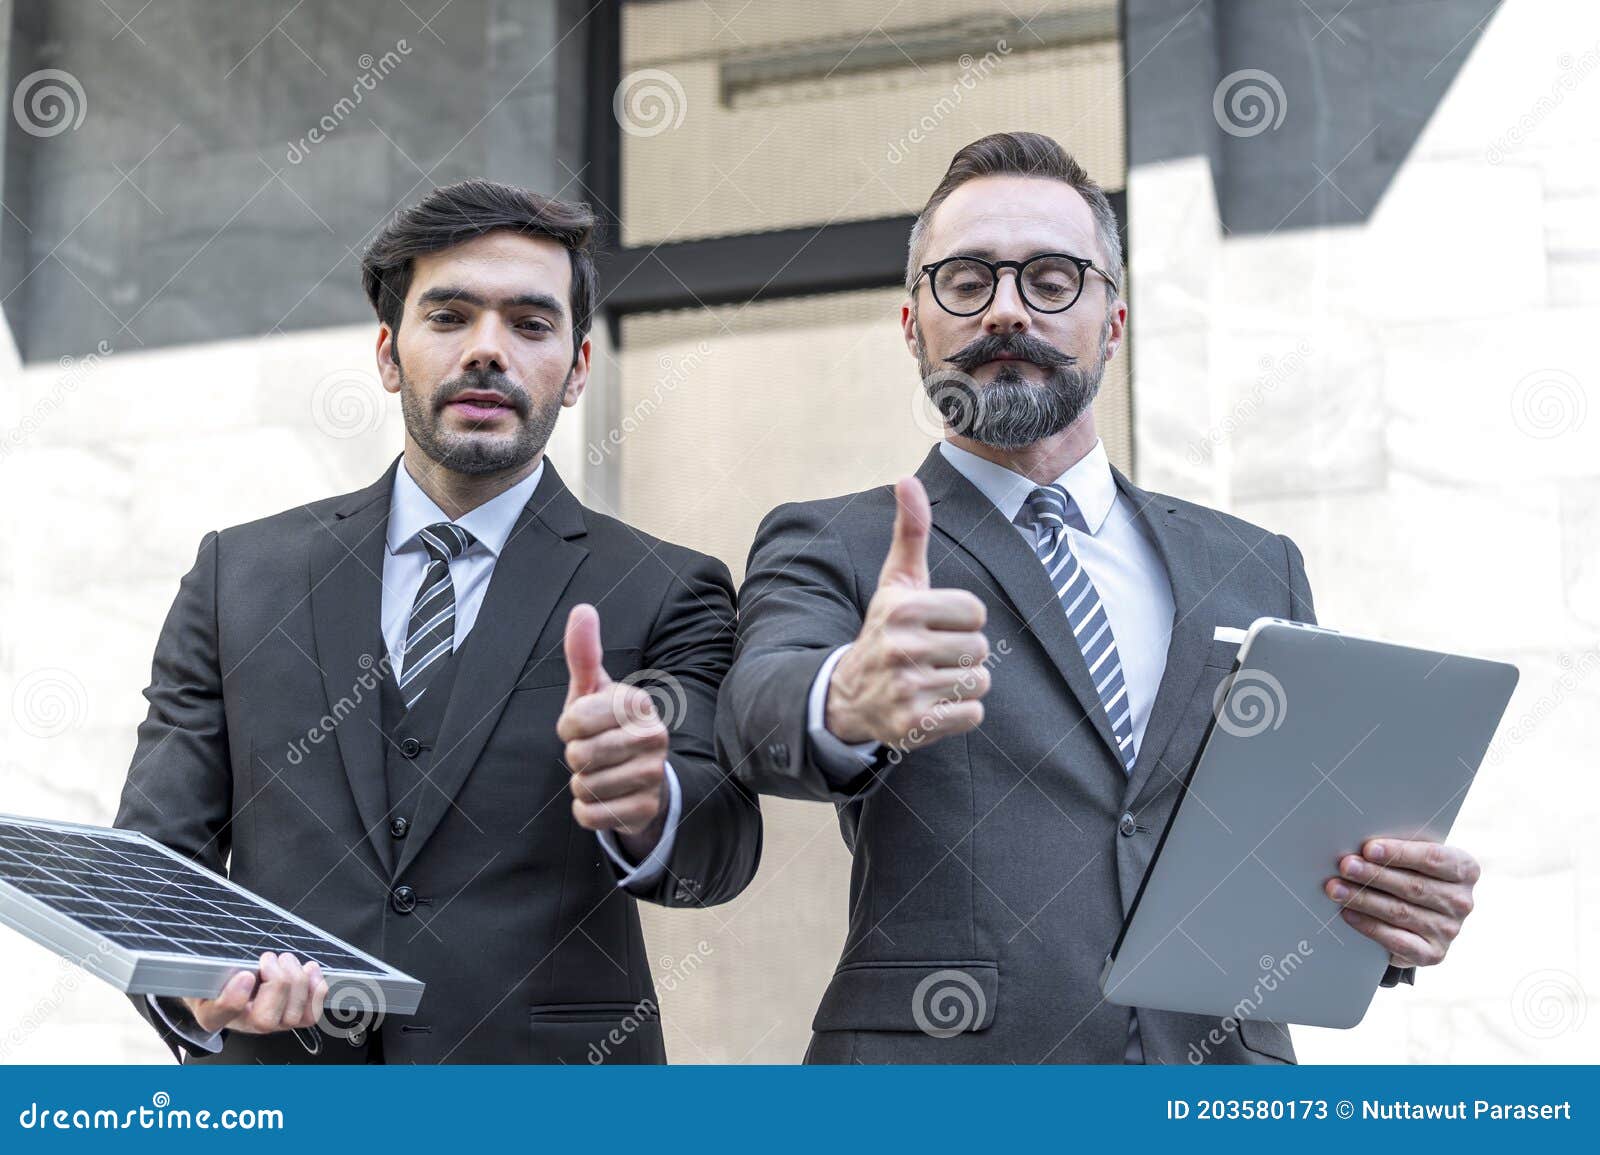 two businessmans trumps up and holding power solar cell and laptops computer with smile confident on site new project power